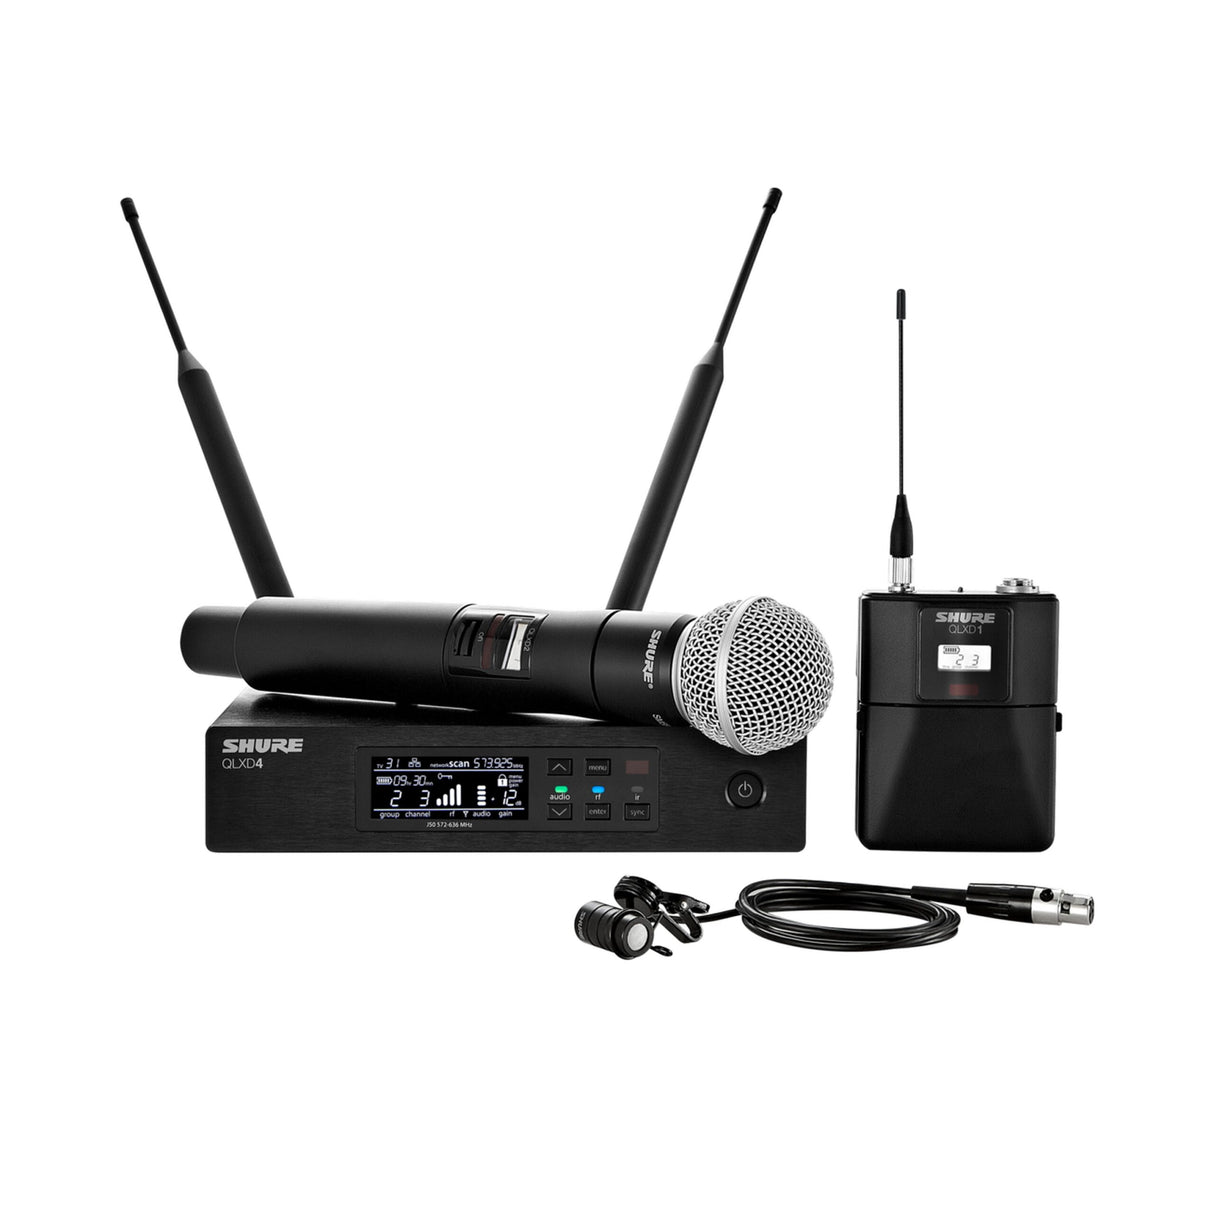 Shure QLXD124/85 Wireless Bodypack and Handheld Vocal Combo System with WL185, V50 174 - 216 MHz